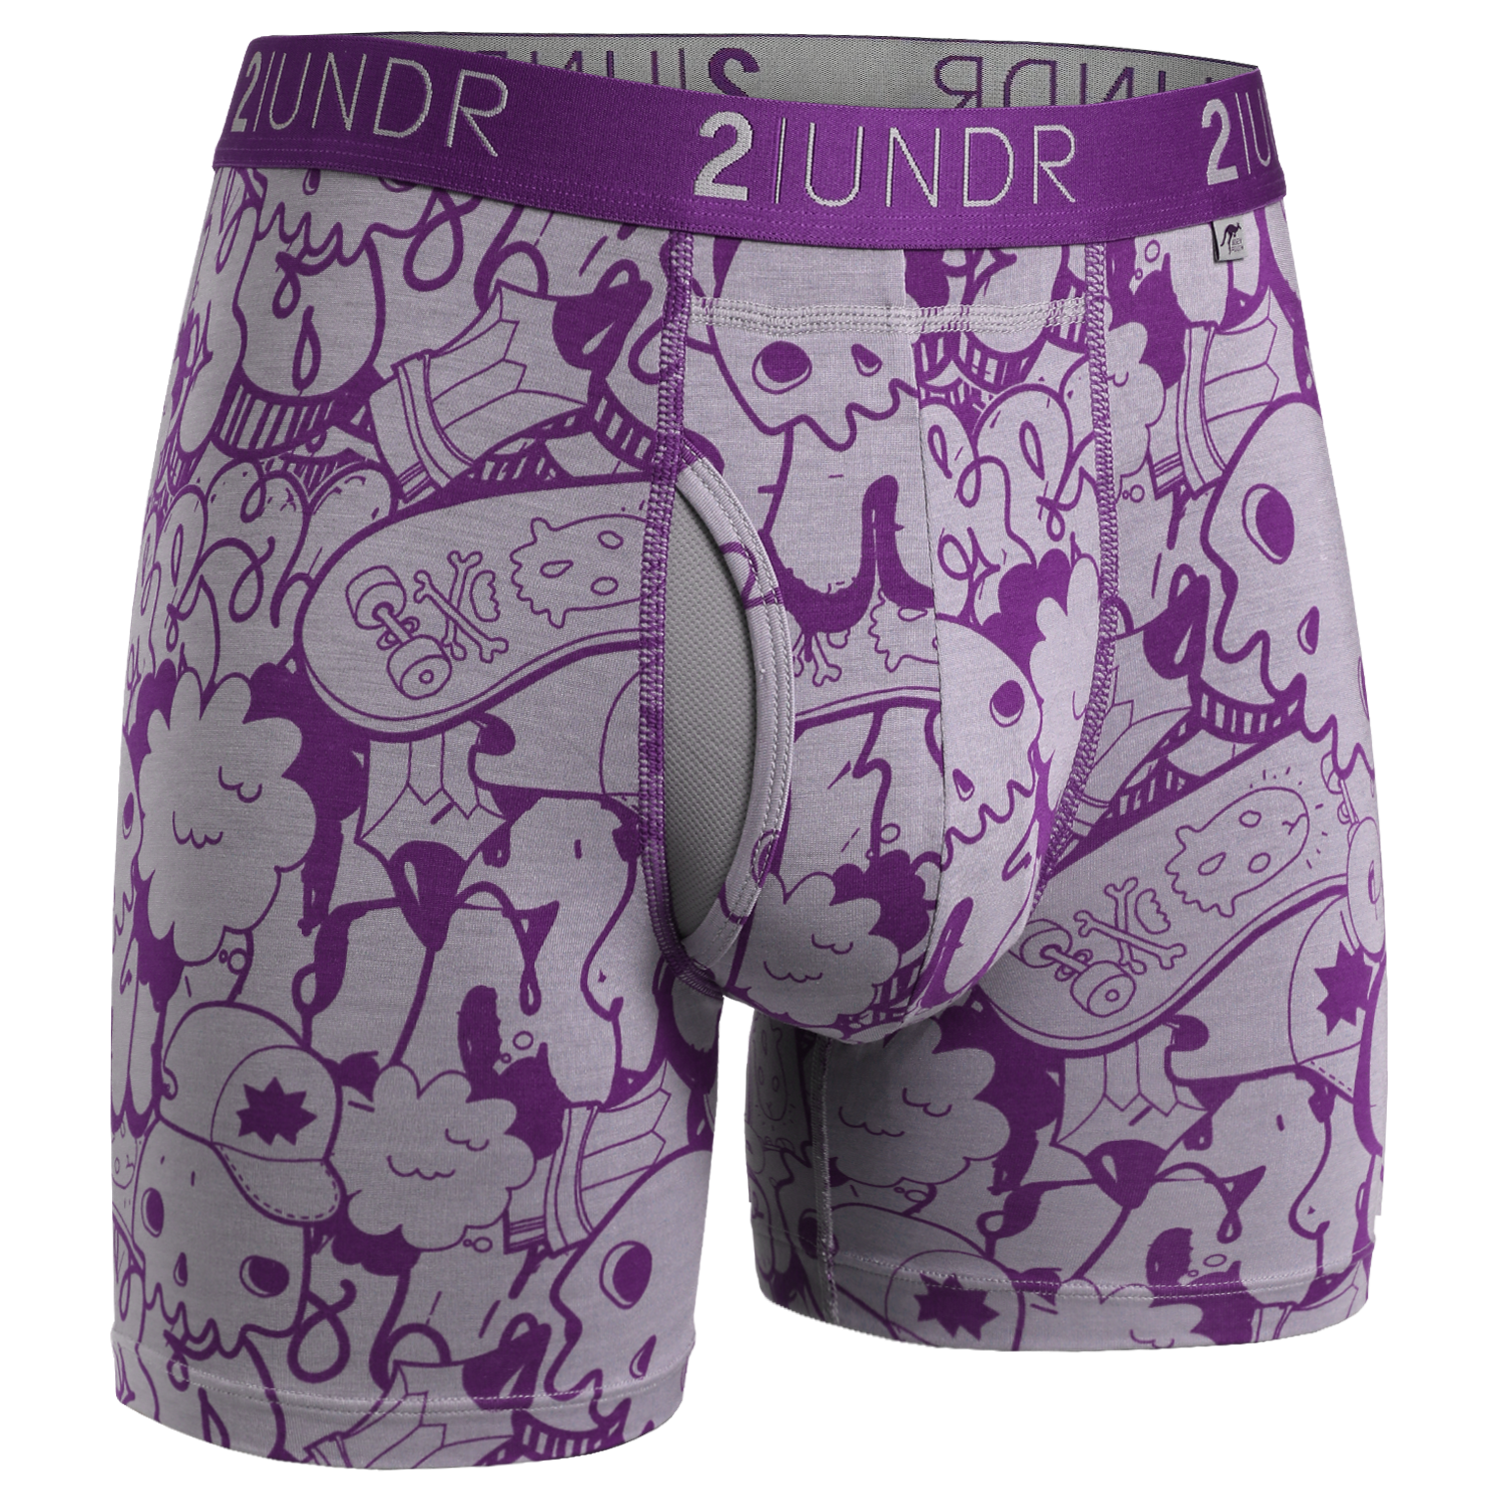 2UNDR - Printed Swing Shift Boxers Skulled